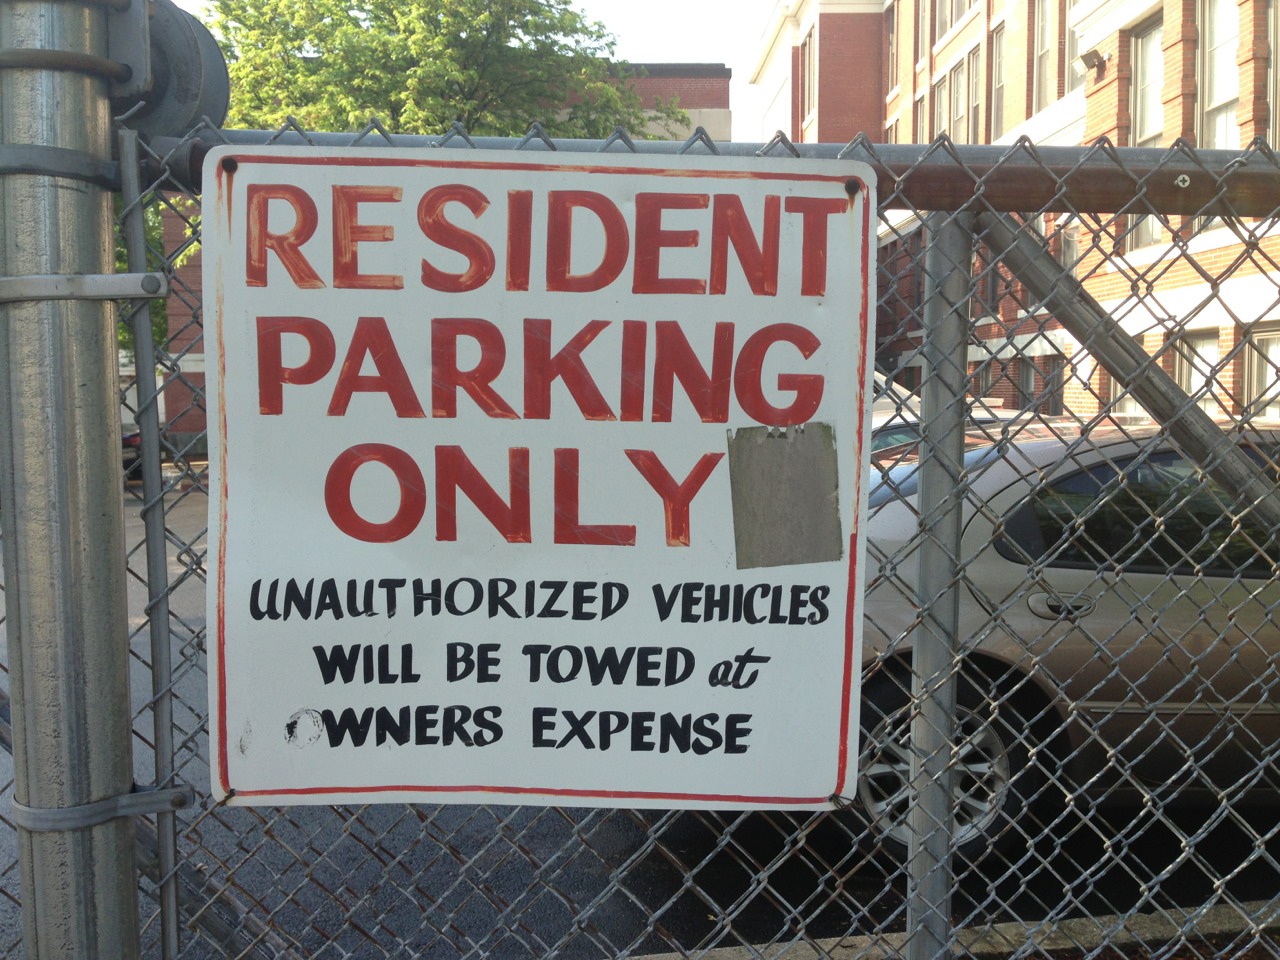 "RESIDENT PARKING ONLY / UNAUTHORIZED VEHICLES WILL BE TOWED at OWNERS EXPENSE"